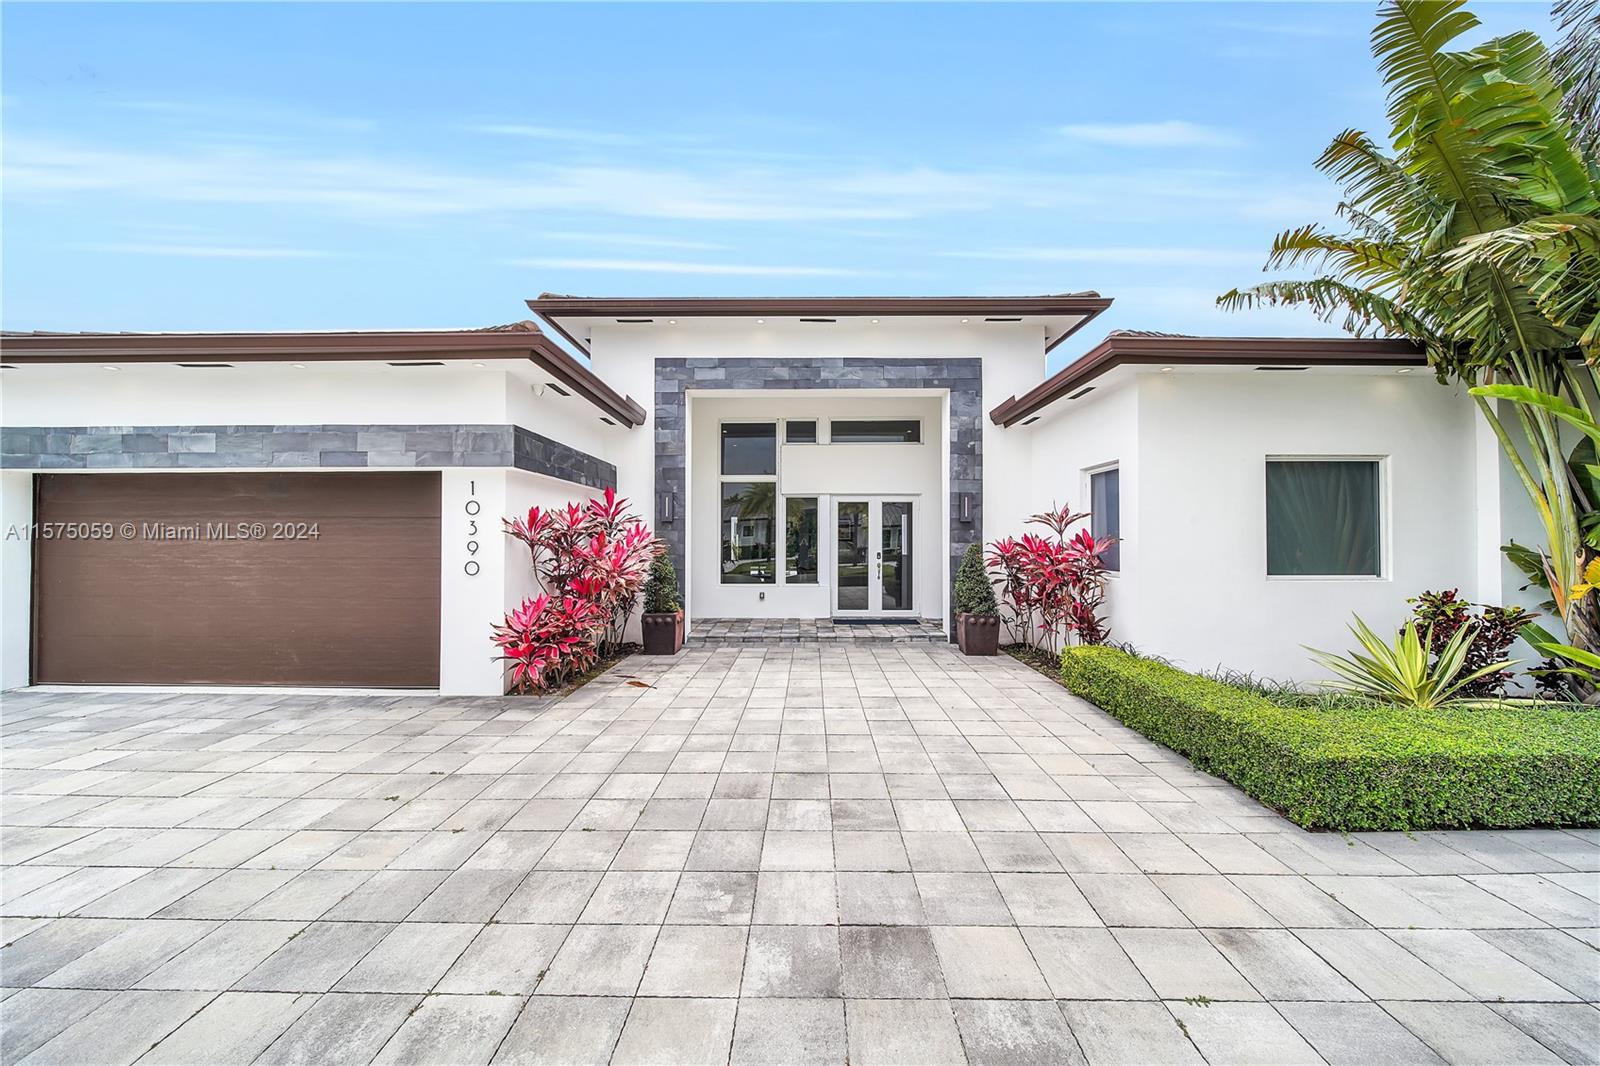 10390 SW 131st Ter, Miami, Florida 33176, 5 Bedrooms Bedrooms, ,6 BathroomsBathrooms,Residential,For Sale,10390 SW 131st Ter,A11575059